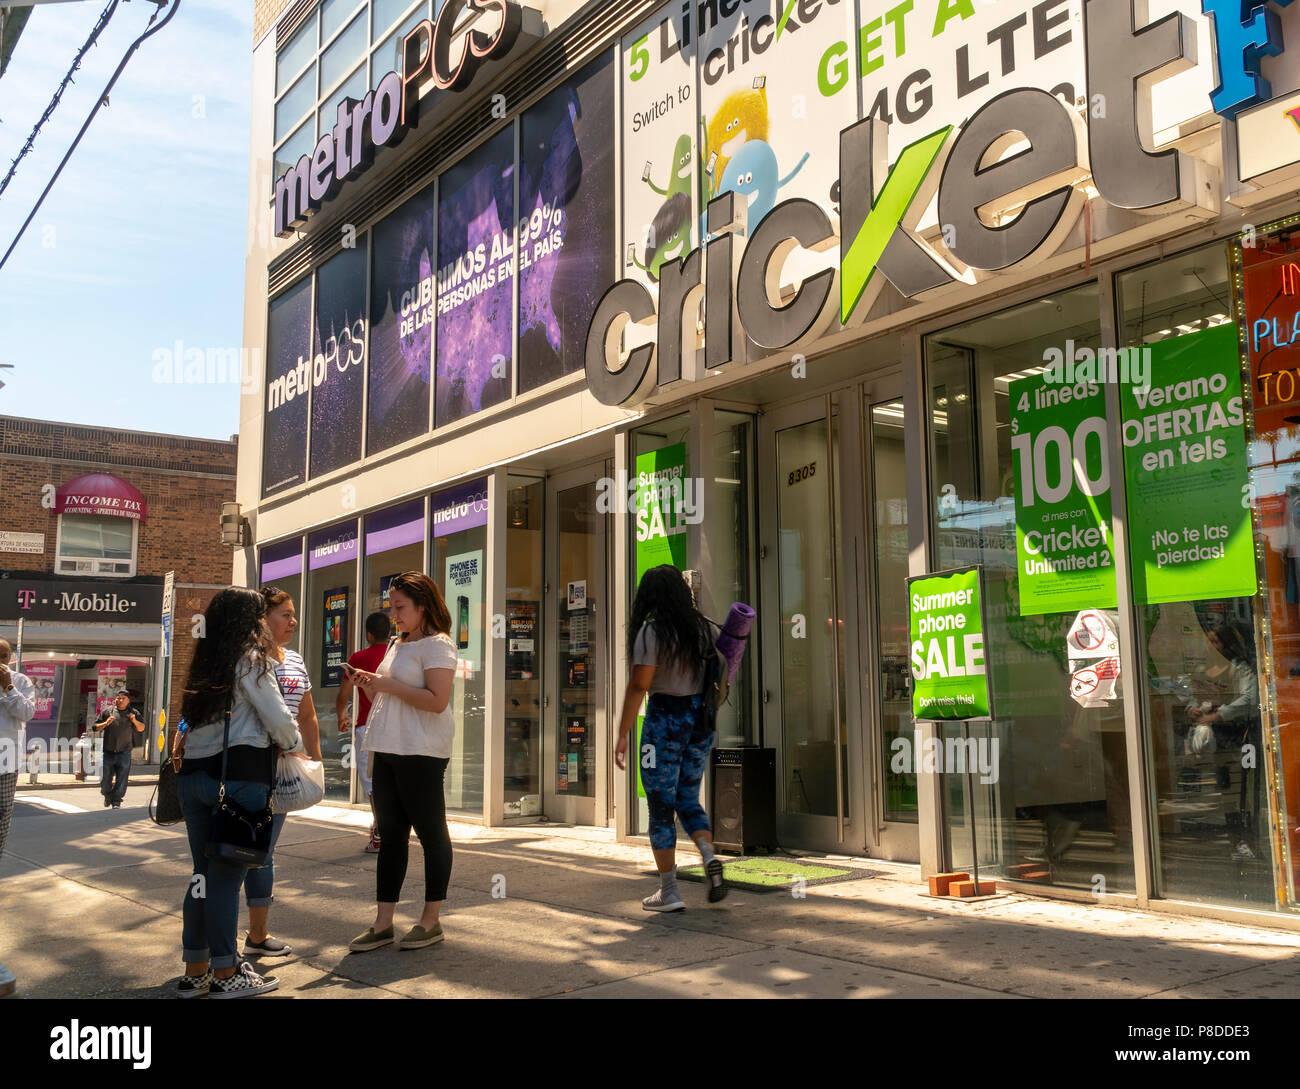 MetroPCS and Cricket wireless stores next to each other on Roosevelt Avenue in the Jackson Heights neighborhood in Queens in New York on Sunday, July 8, 2018. The Jackson Heights neighborhood is home to a mosaic of ethnic groups  which include Hispanics, Indians, Pakistanis, Tibetans, Southeast Asian as well as long-time Jewish and Italian residents.  (Â© Richard B. Levine) Stock Photo